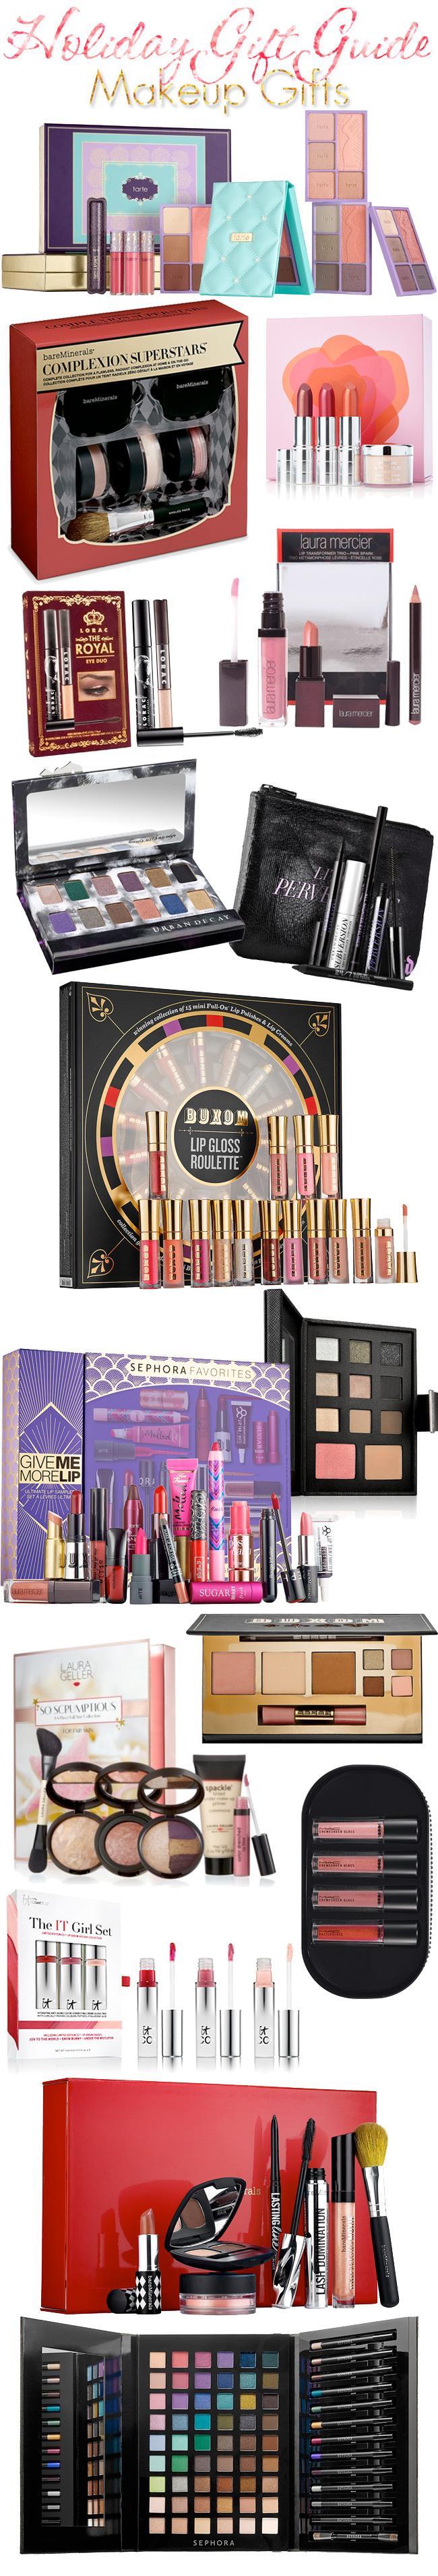 Holiday Gift Guide: Makeup Gifts for Women including bare Minerals, Laura Mercier, Tarte Cosmetics, Laura Geller, BUXOM, Urban Decay, LORAC, MAC Cosmetics, Prescriptives and more.